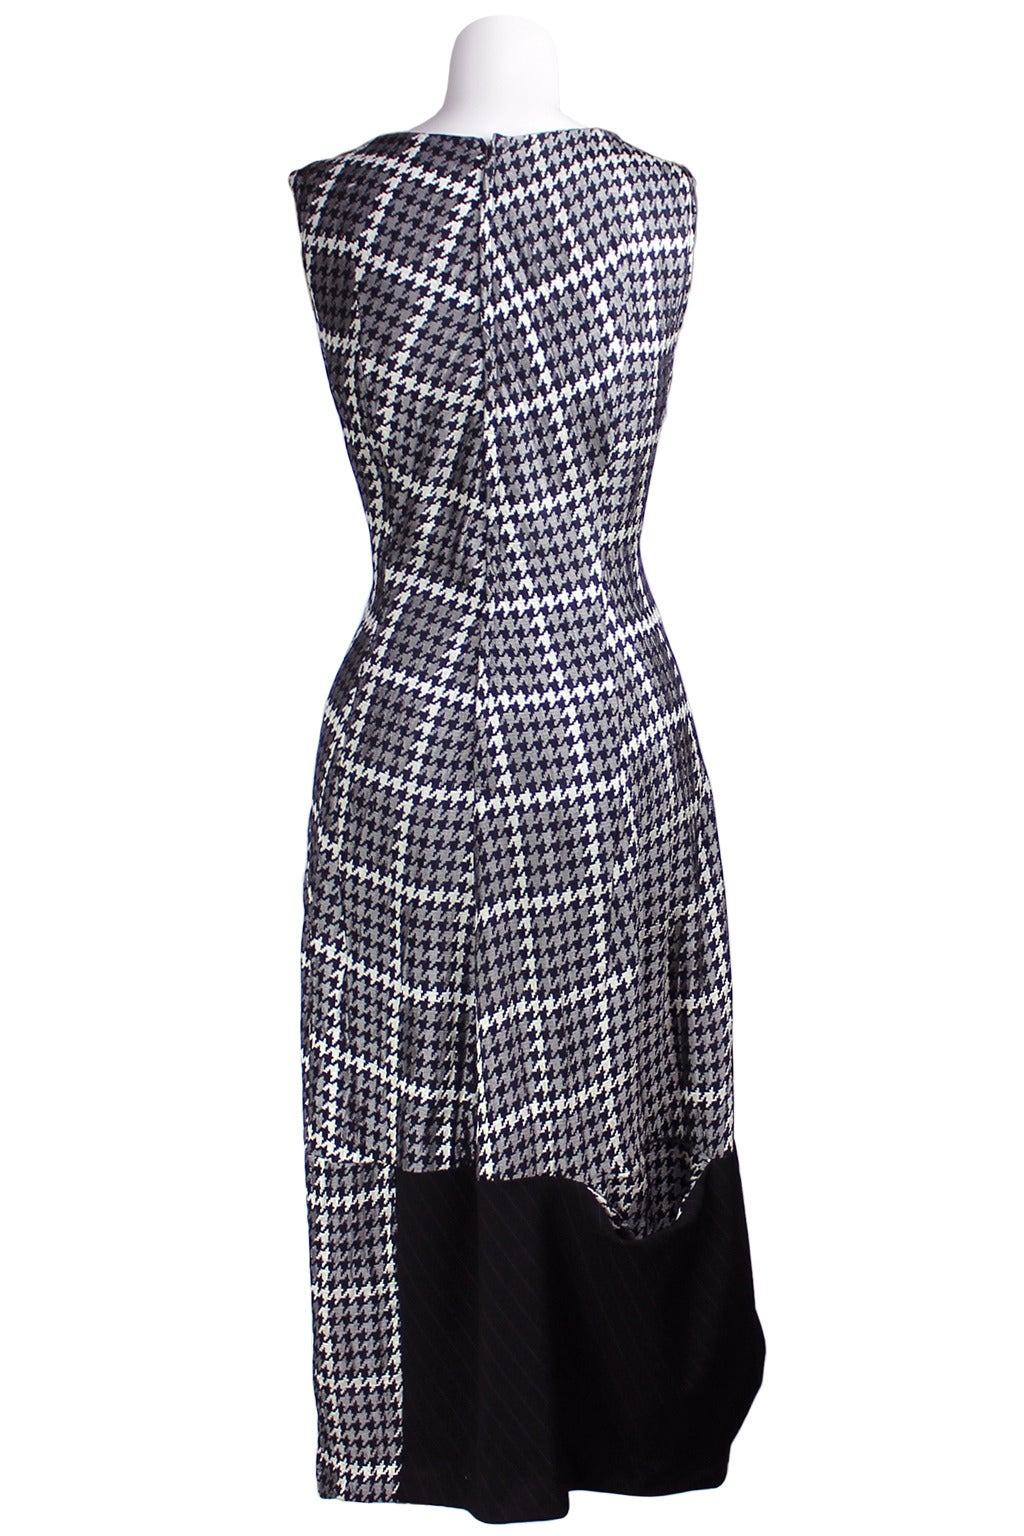 Comme des Garcons Asymmetrical Houndstooth Dress In Excellent Condition In New York, NY